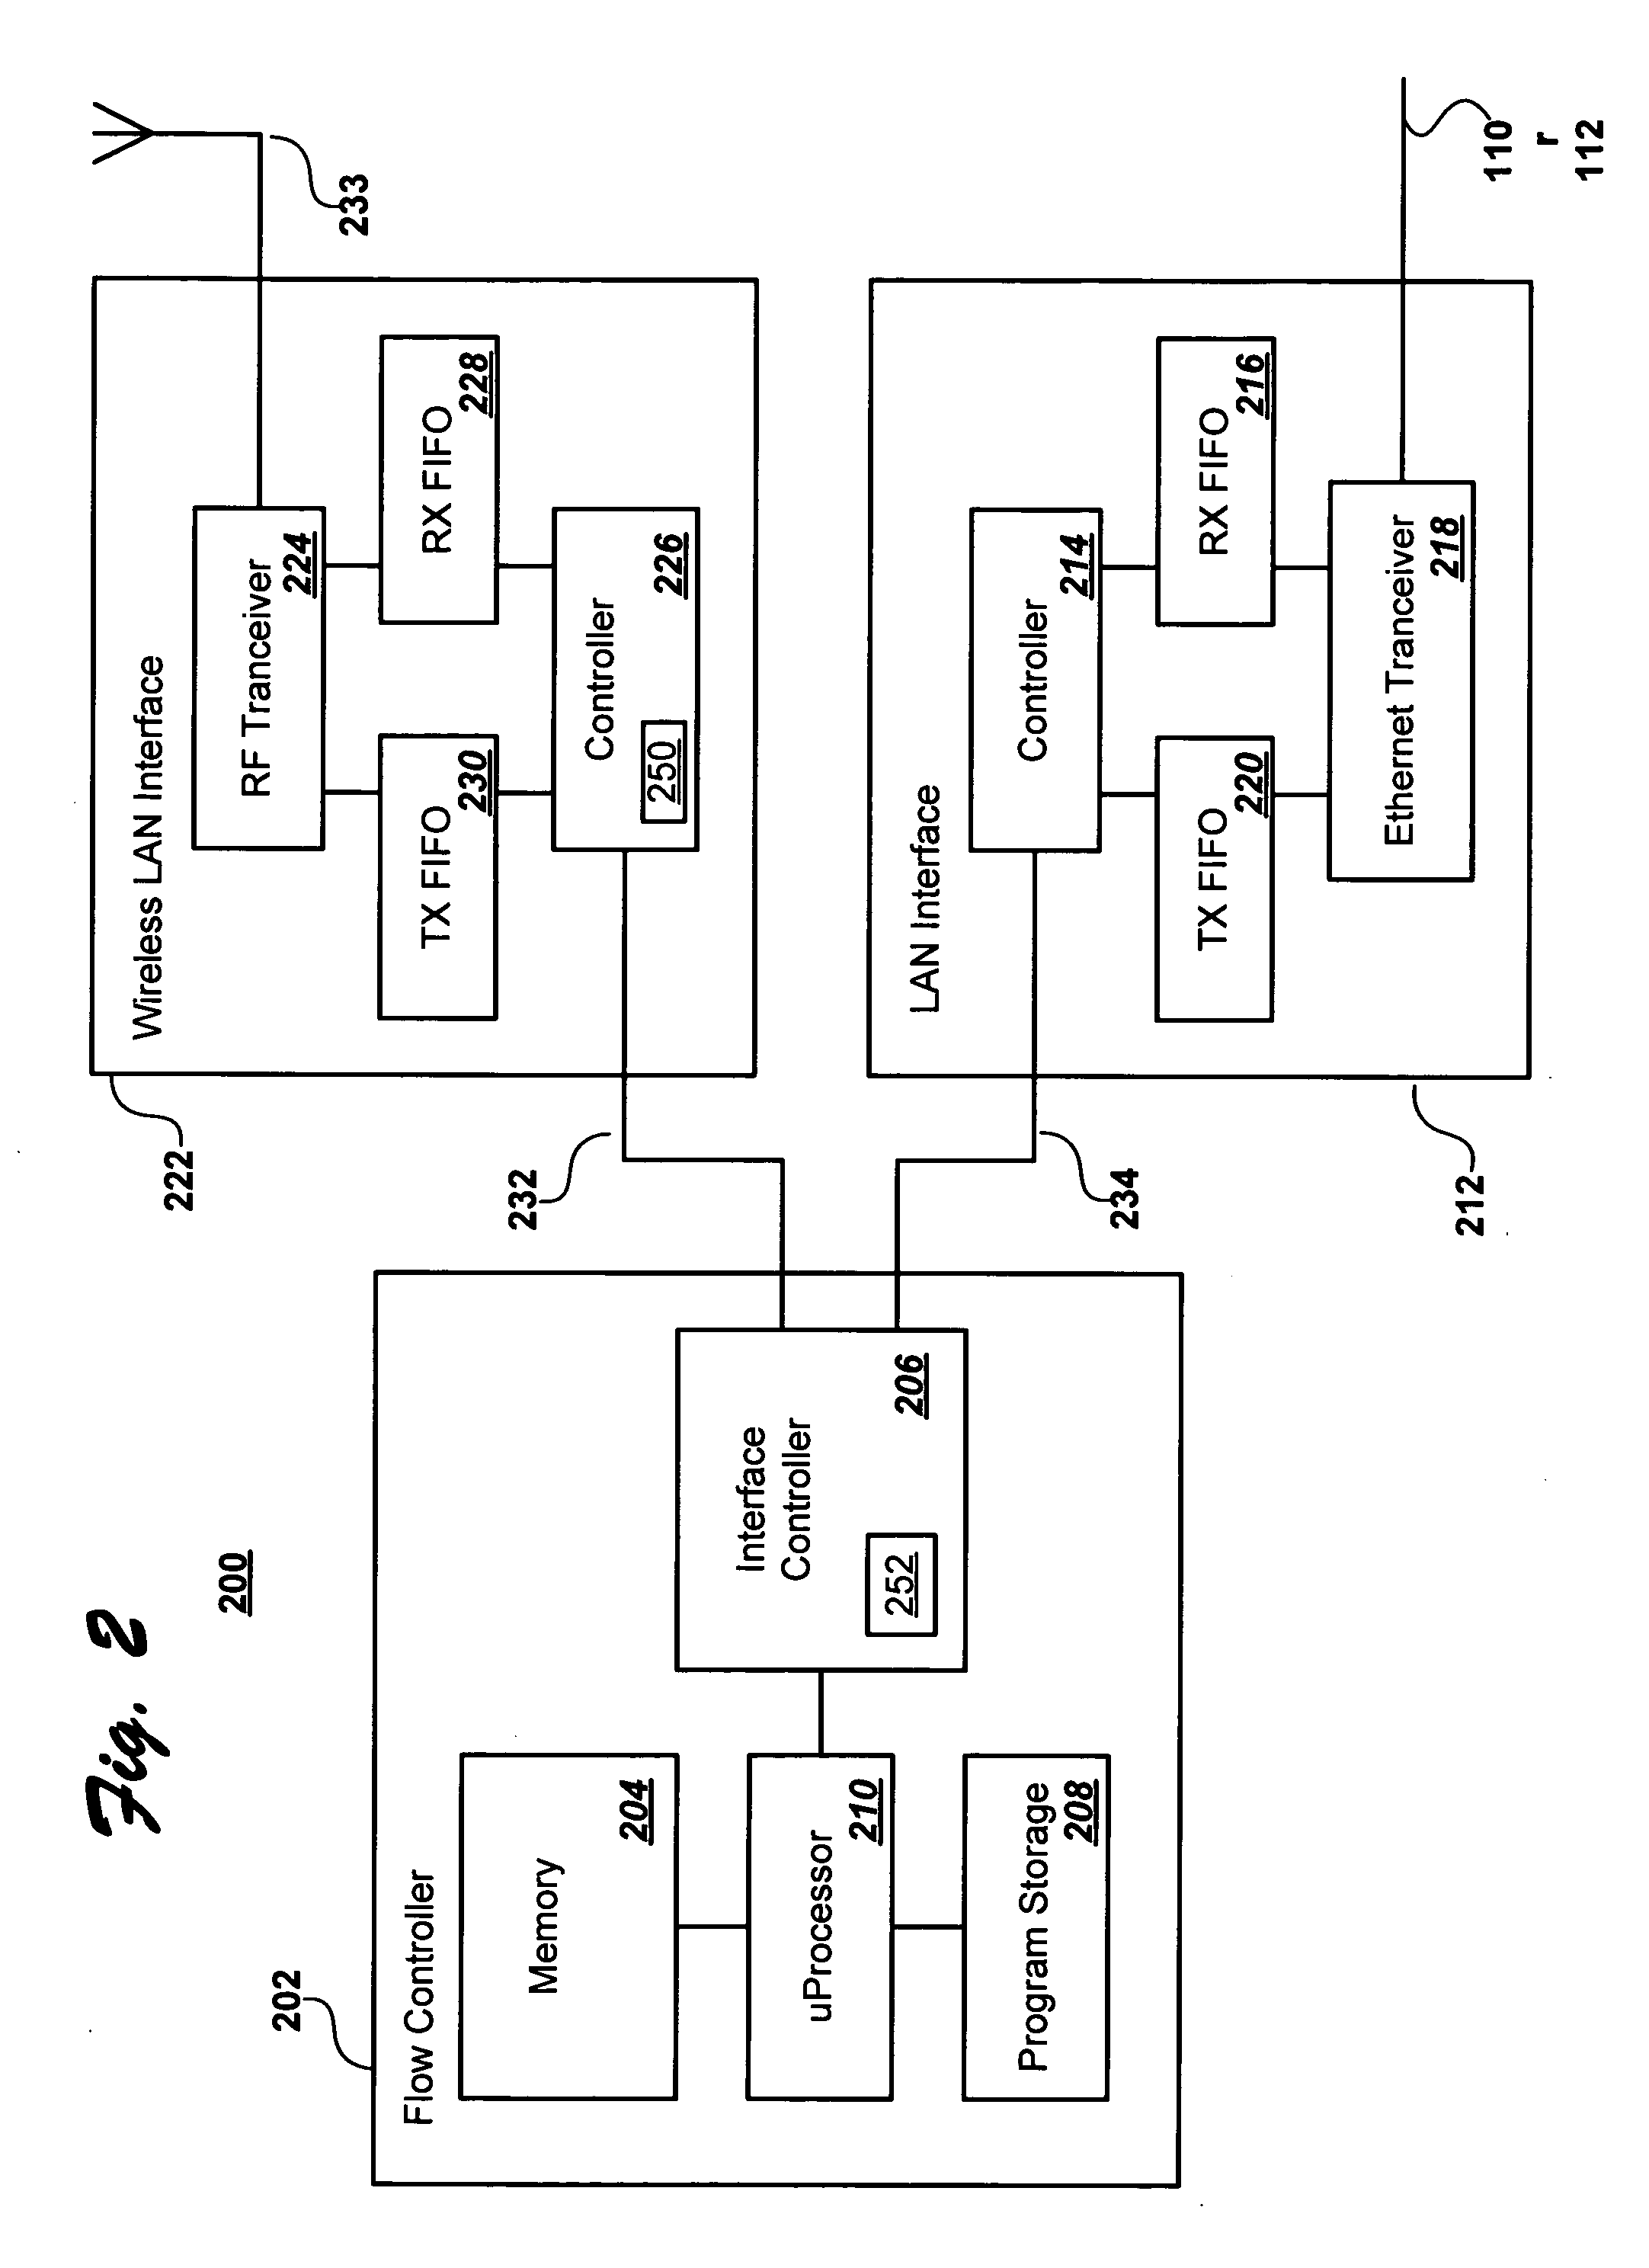 Autonomic client reassociation in a wireless local area network